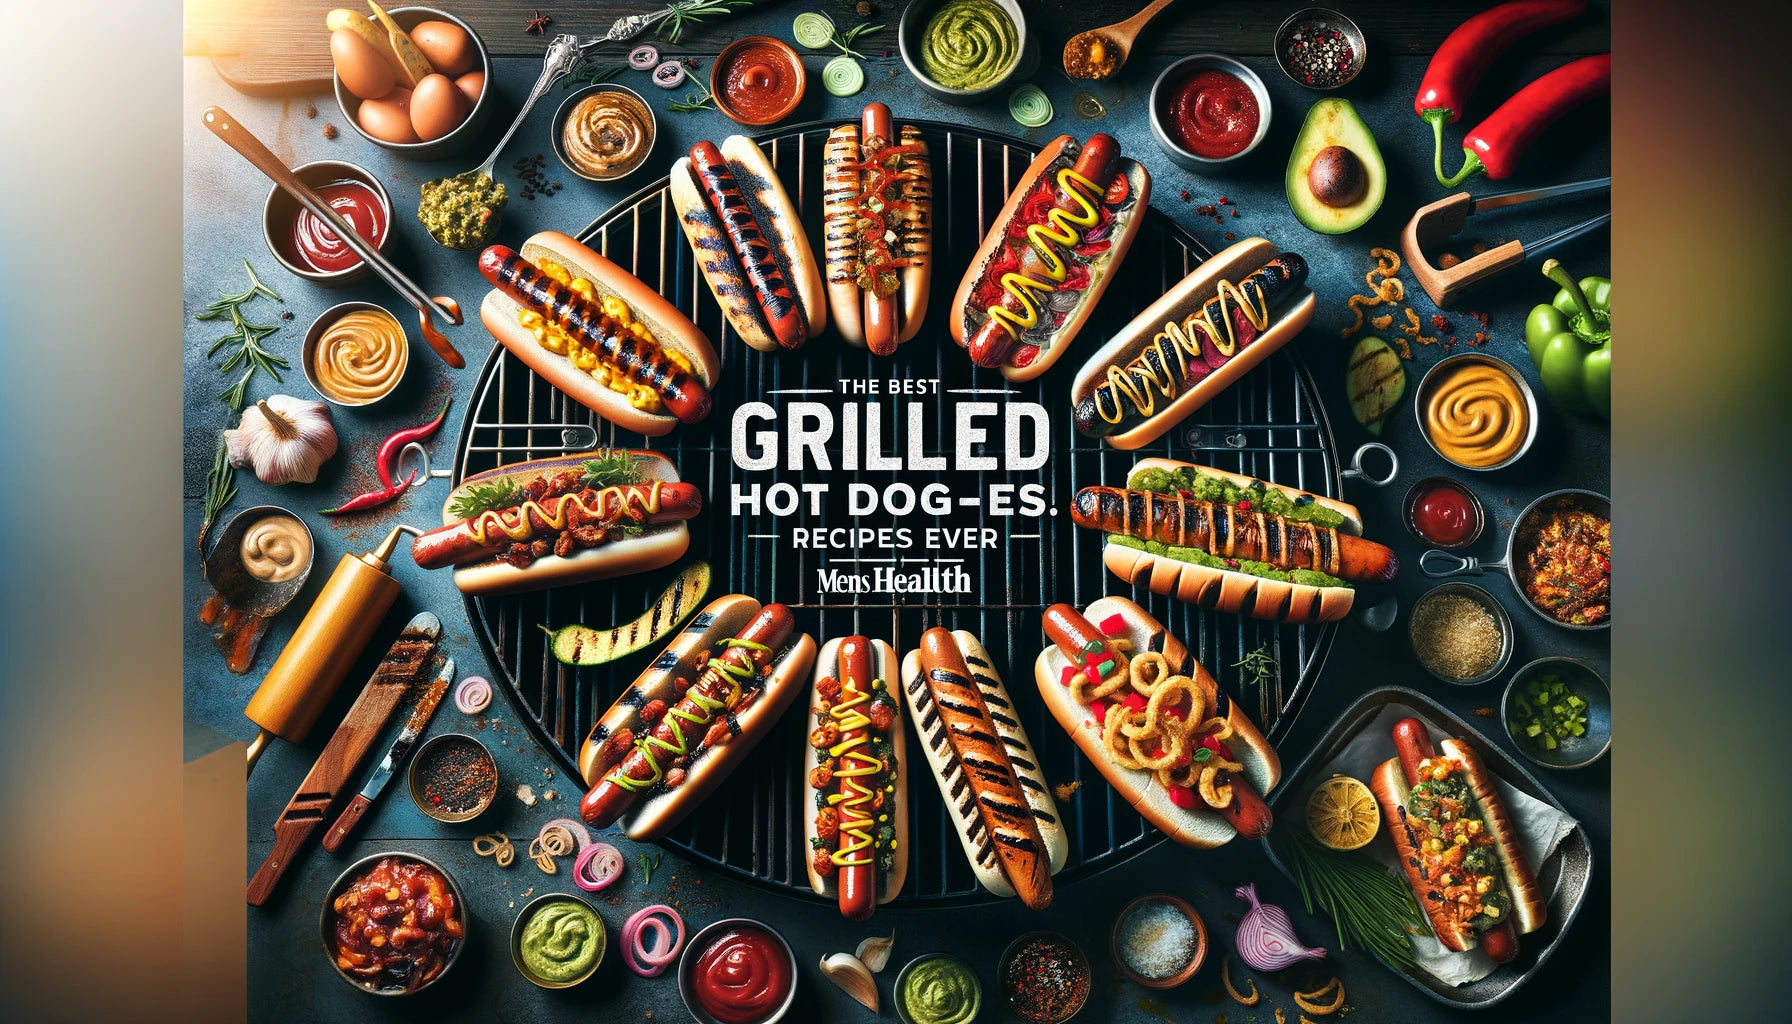 Best Grilled Hot Dogs Recipes Ever, featuring 9 different ways to grill the perfect hot dog, from juicy classics to unique BBQ twists